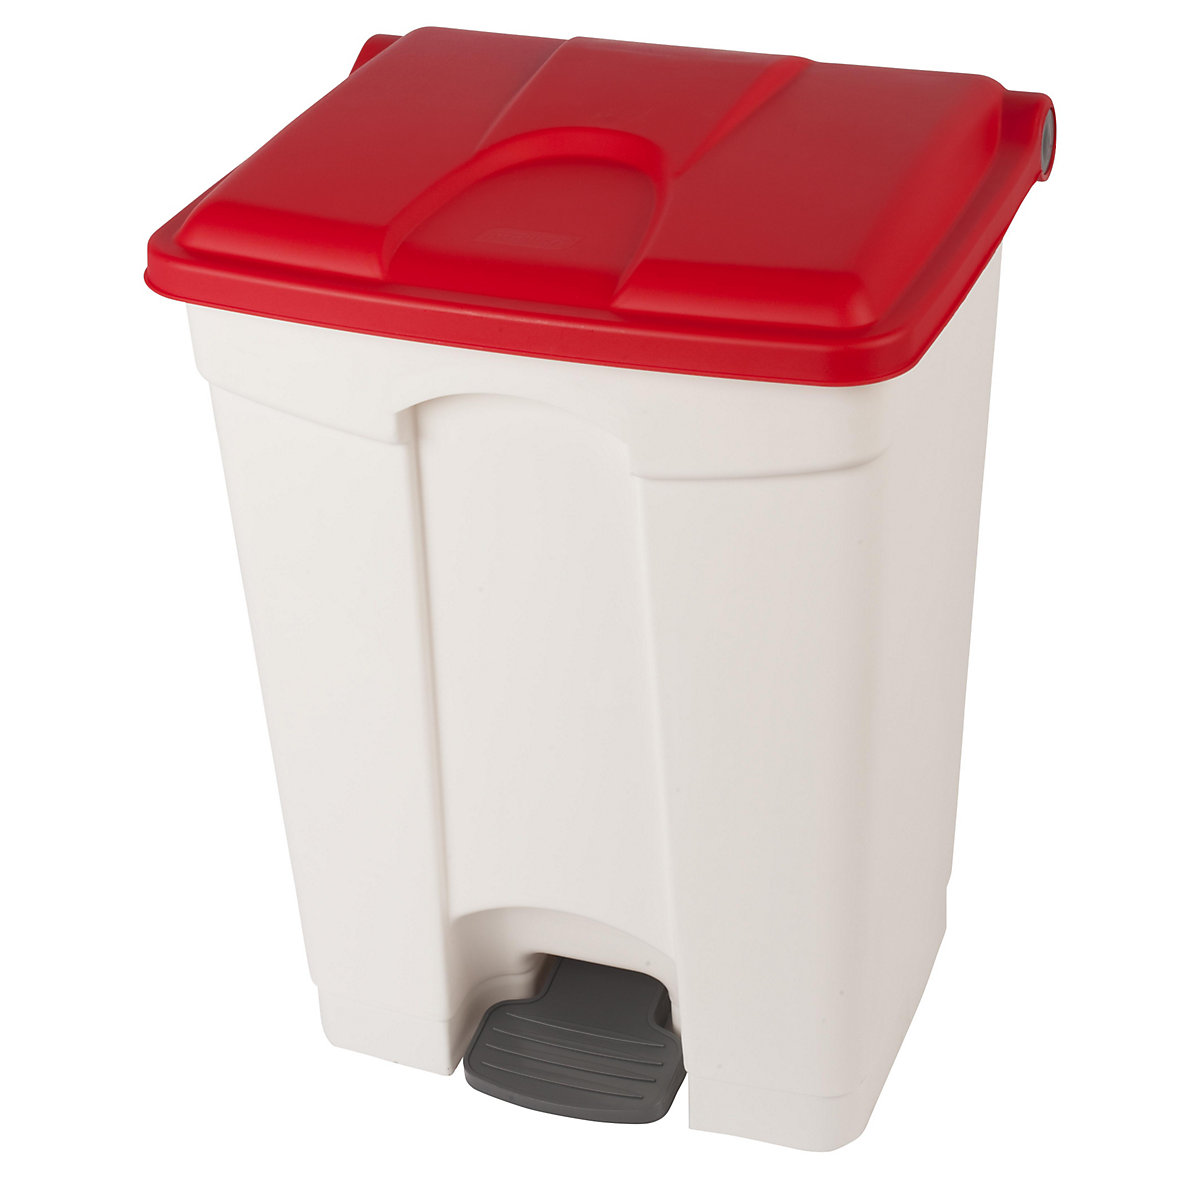 EUROKRAFTbasic – Pedal waste collector, capacity 70 l, WxHxD 505 x 675 x 415 mm, white, red lid